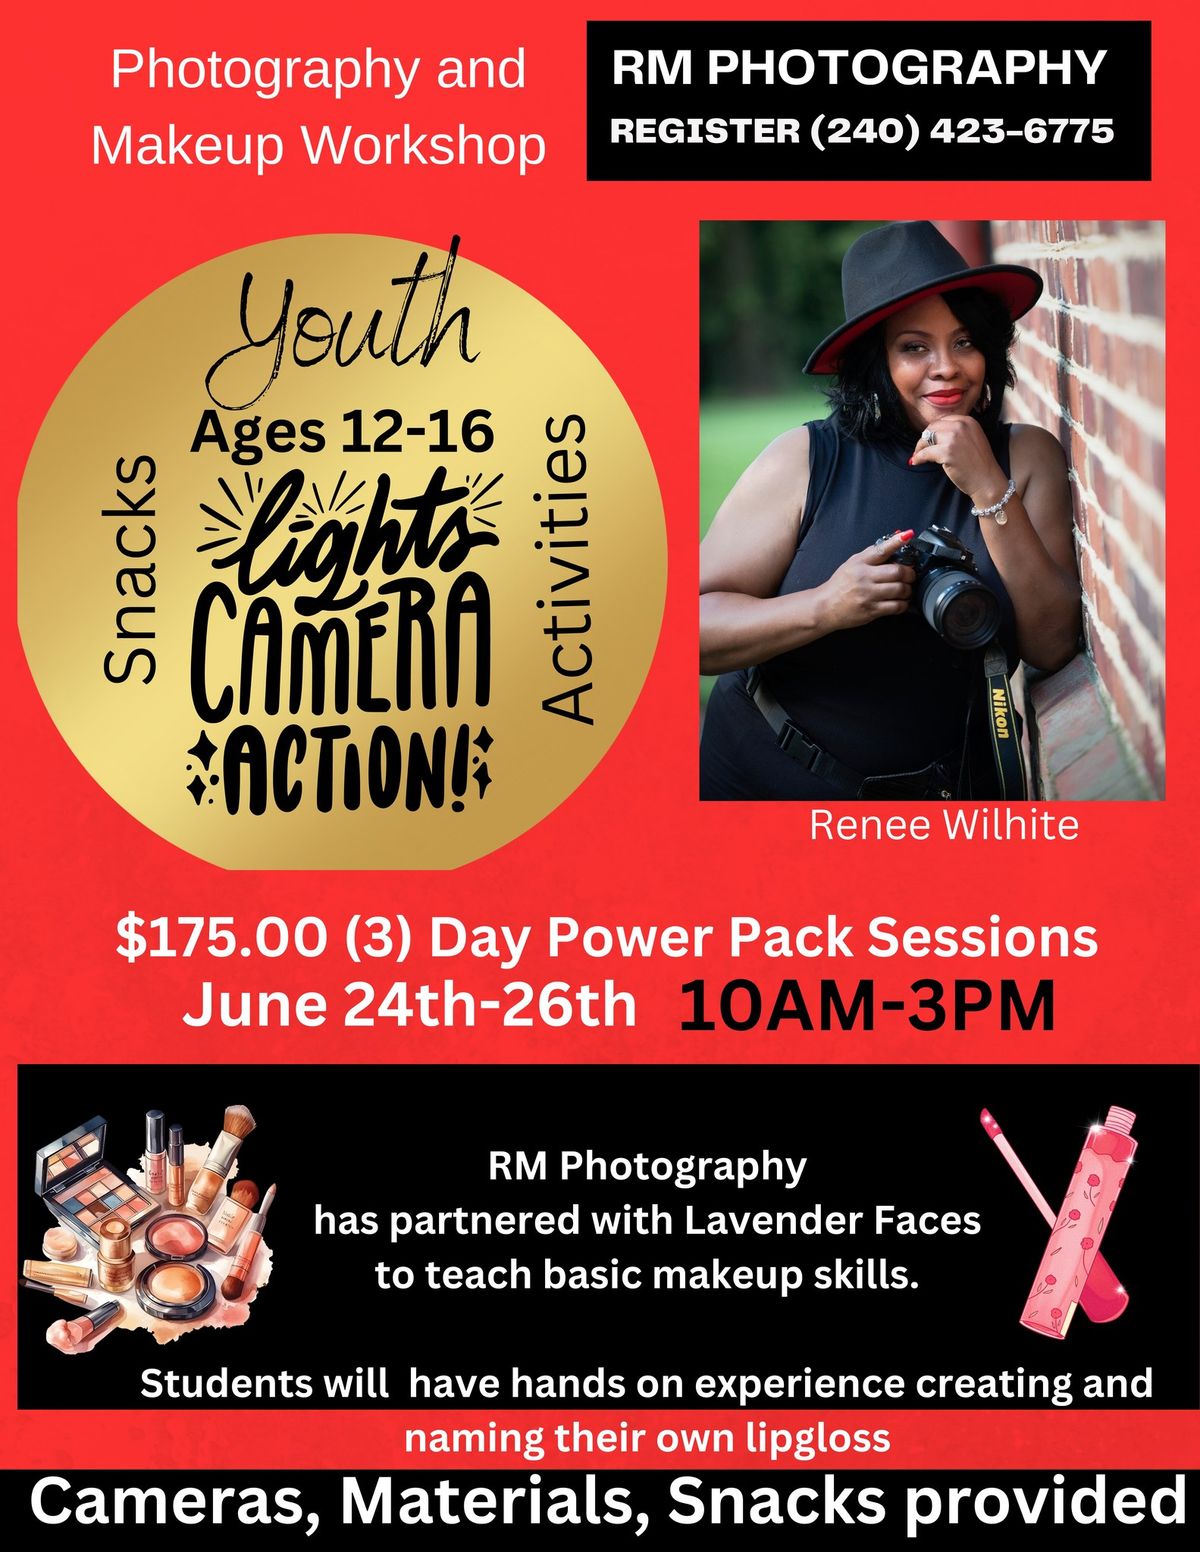 Photography and Makeup Sessions for Youth Ages 12-16